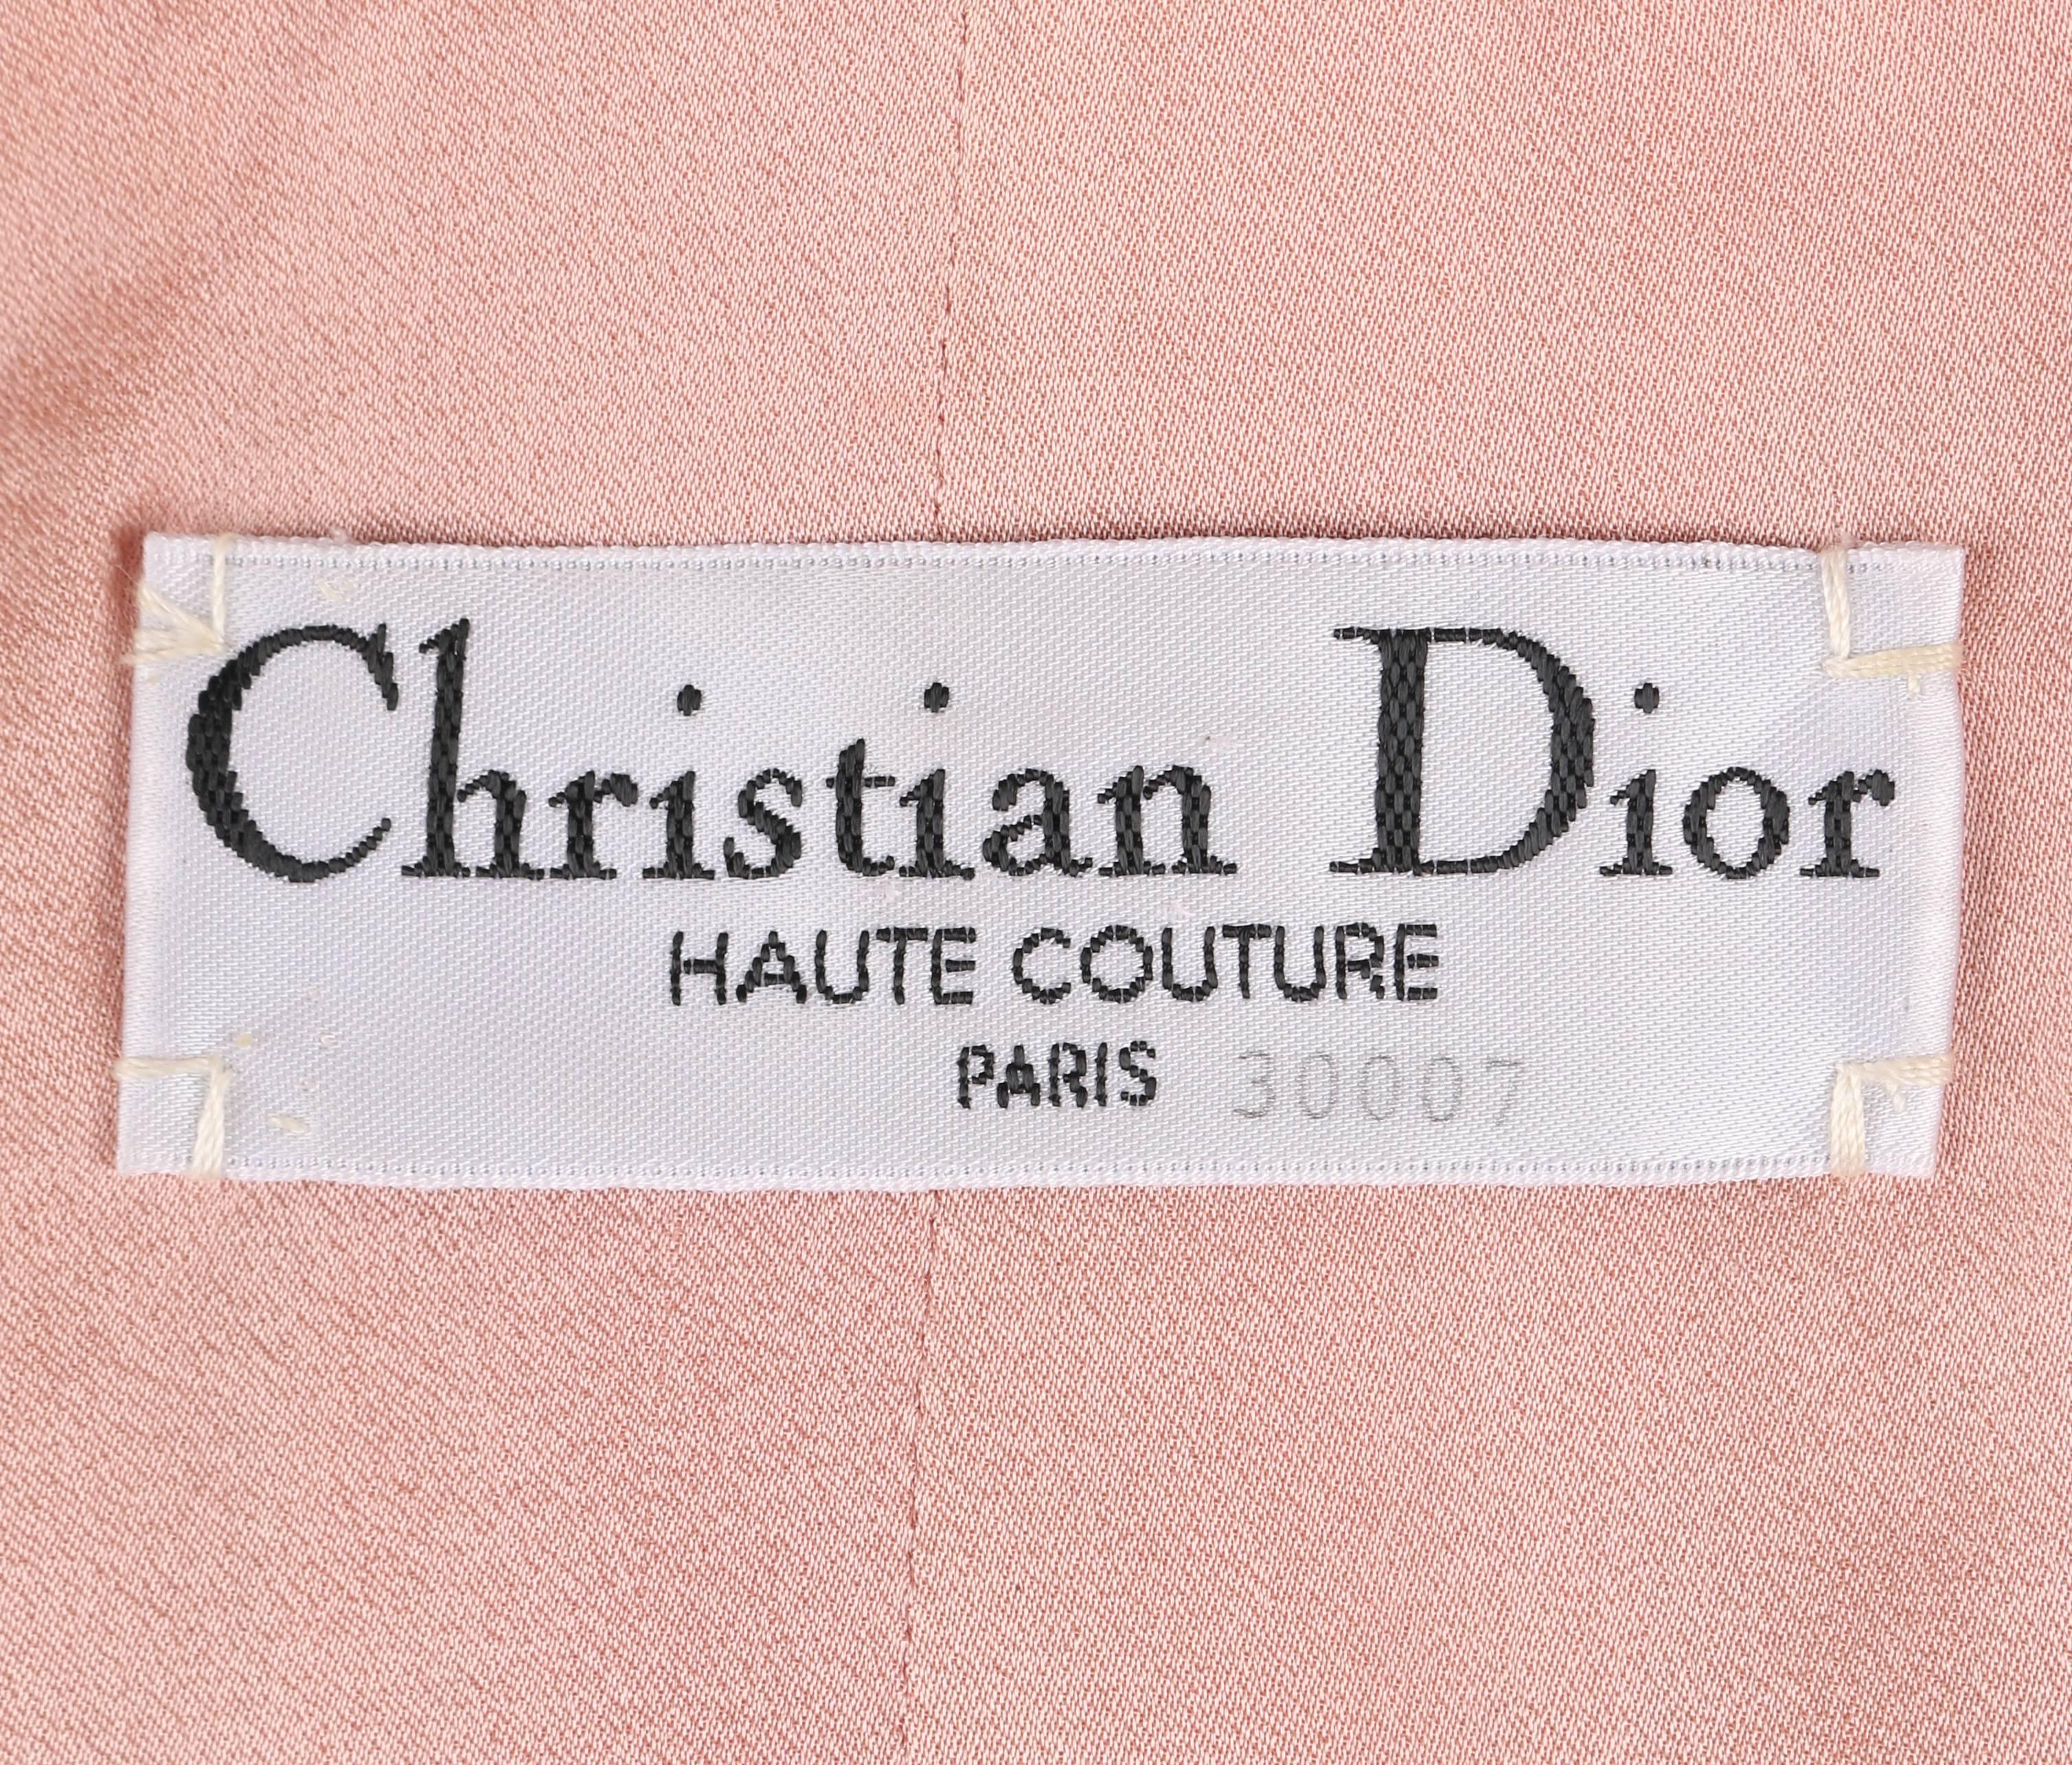 Christian Dior Haute Couture c.1990's (inspired by the S/S 1962 Dior garments) vintage two piece pink silk skirt suit. This suit was designed specifically for New York Philanthropist, Carroll Petrie. Raw silk jacket has 3/4 length sleeves with